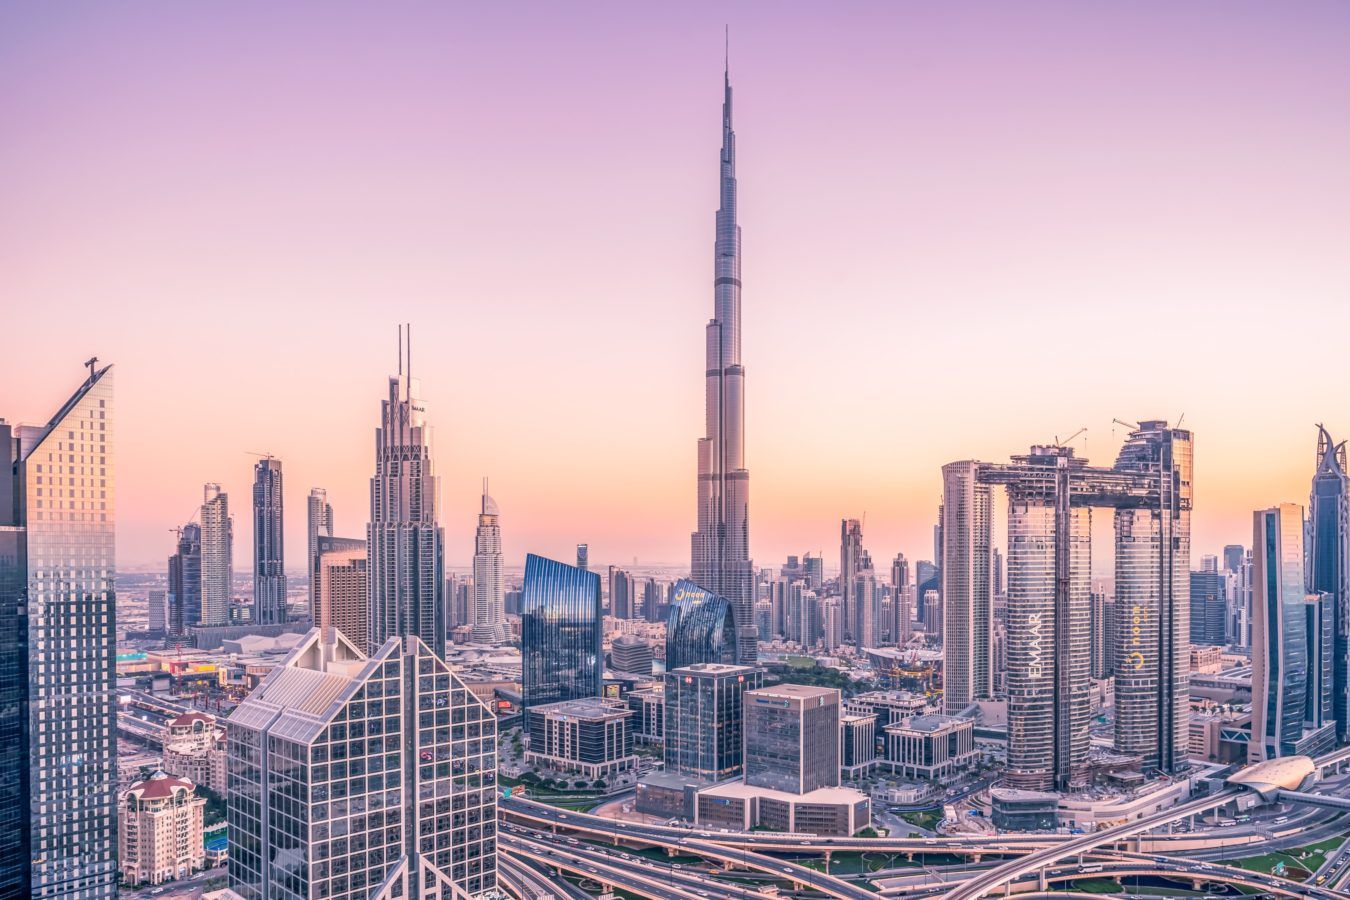 Dubai tourism: The Gulf city state will reopen borders for international travel from July 7